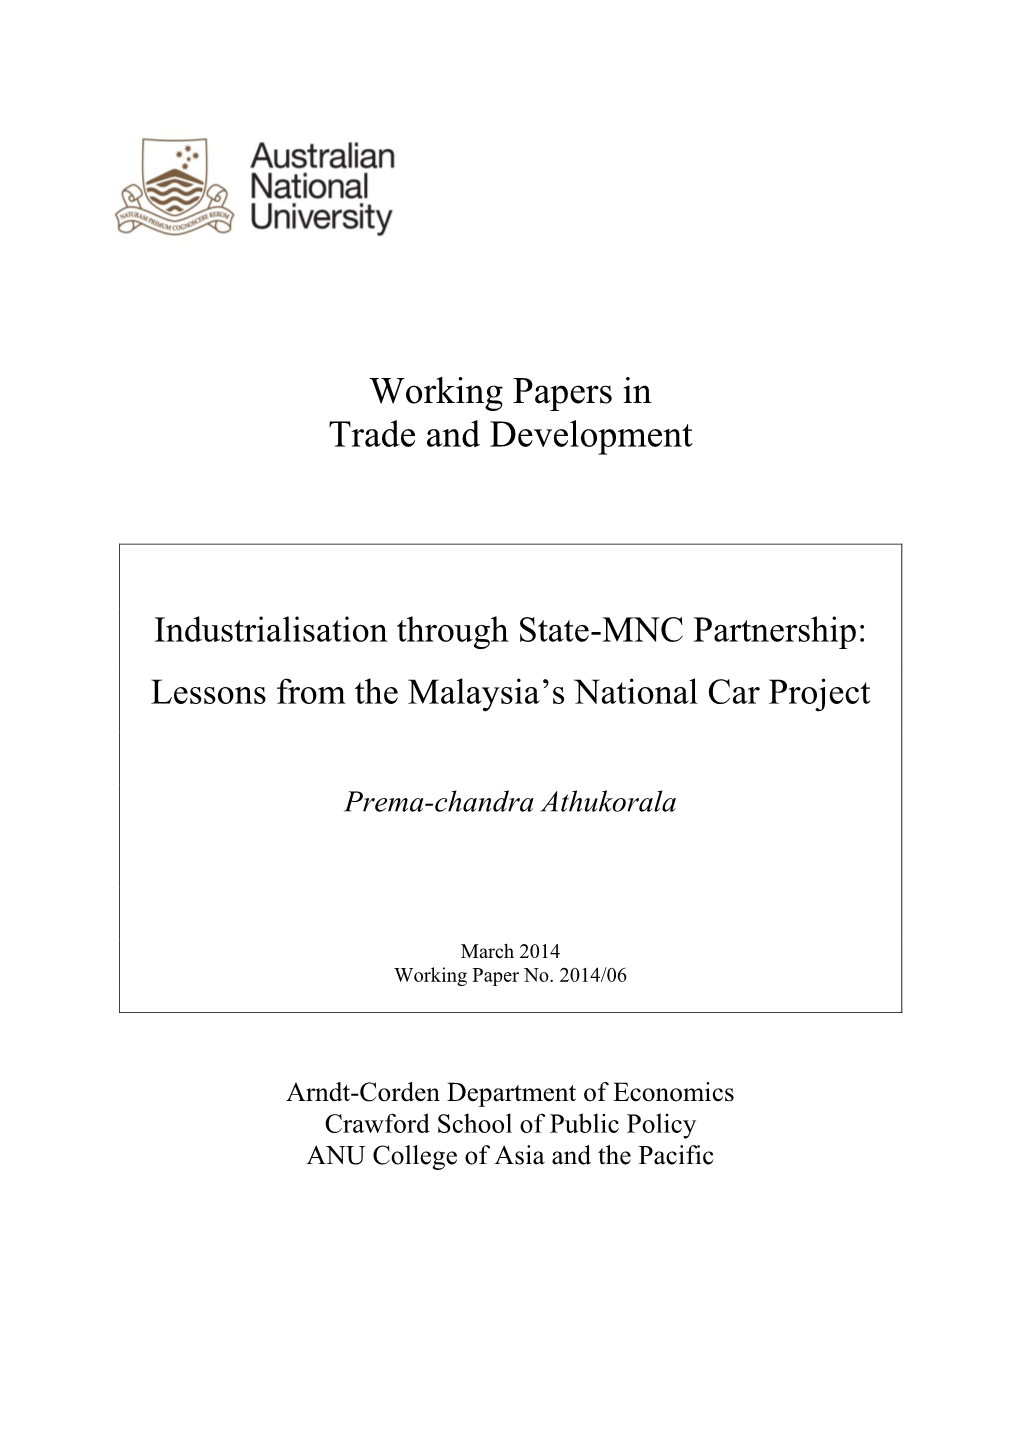 Lessons from the Malaysia's National Car Project